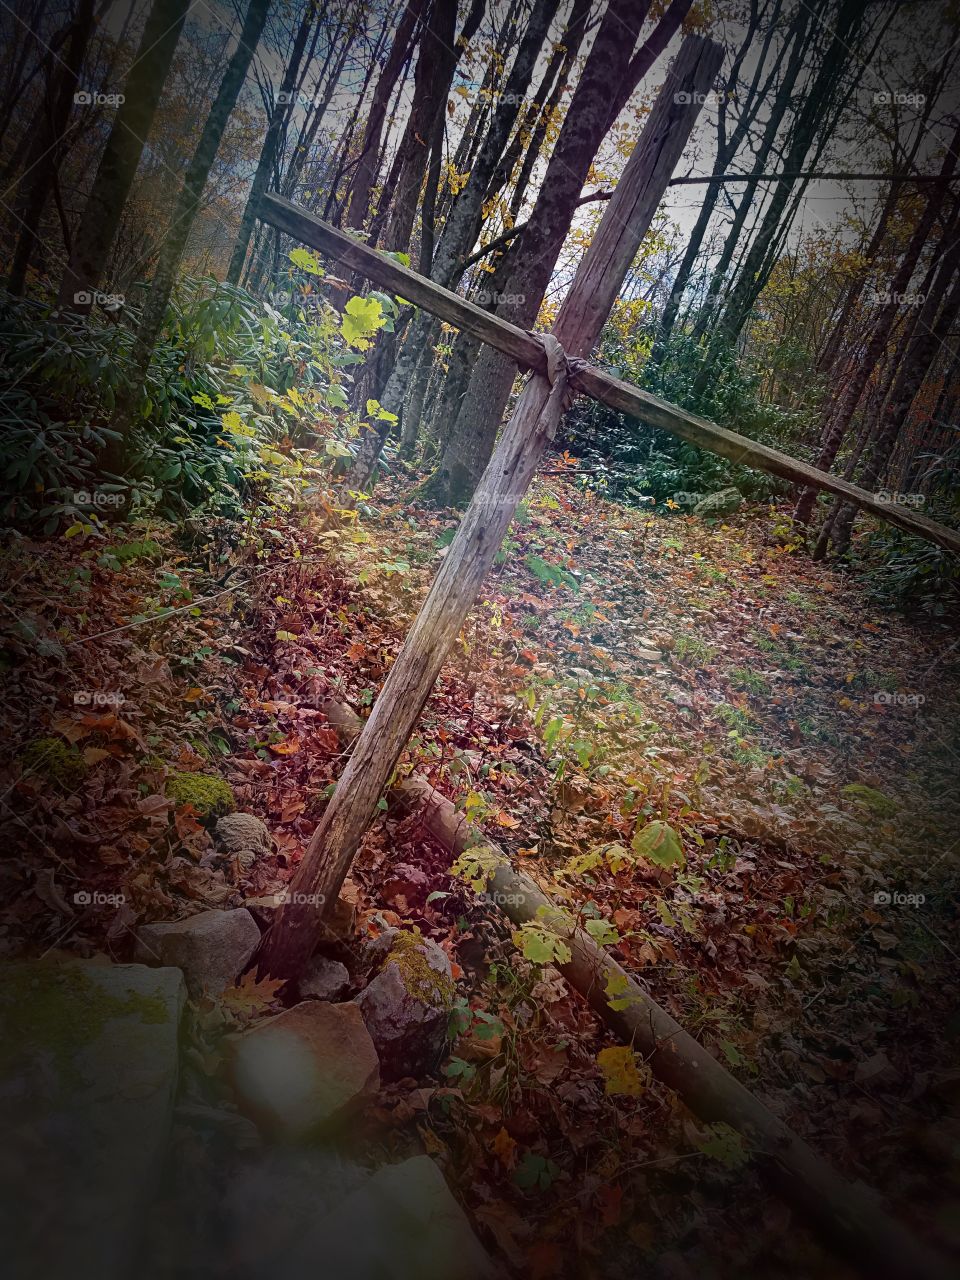 Found this in the woods, supposed to be an India burial. Very exquisite!